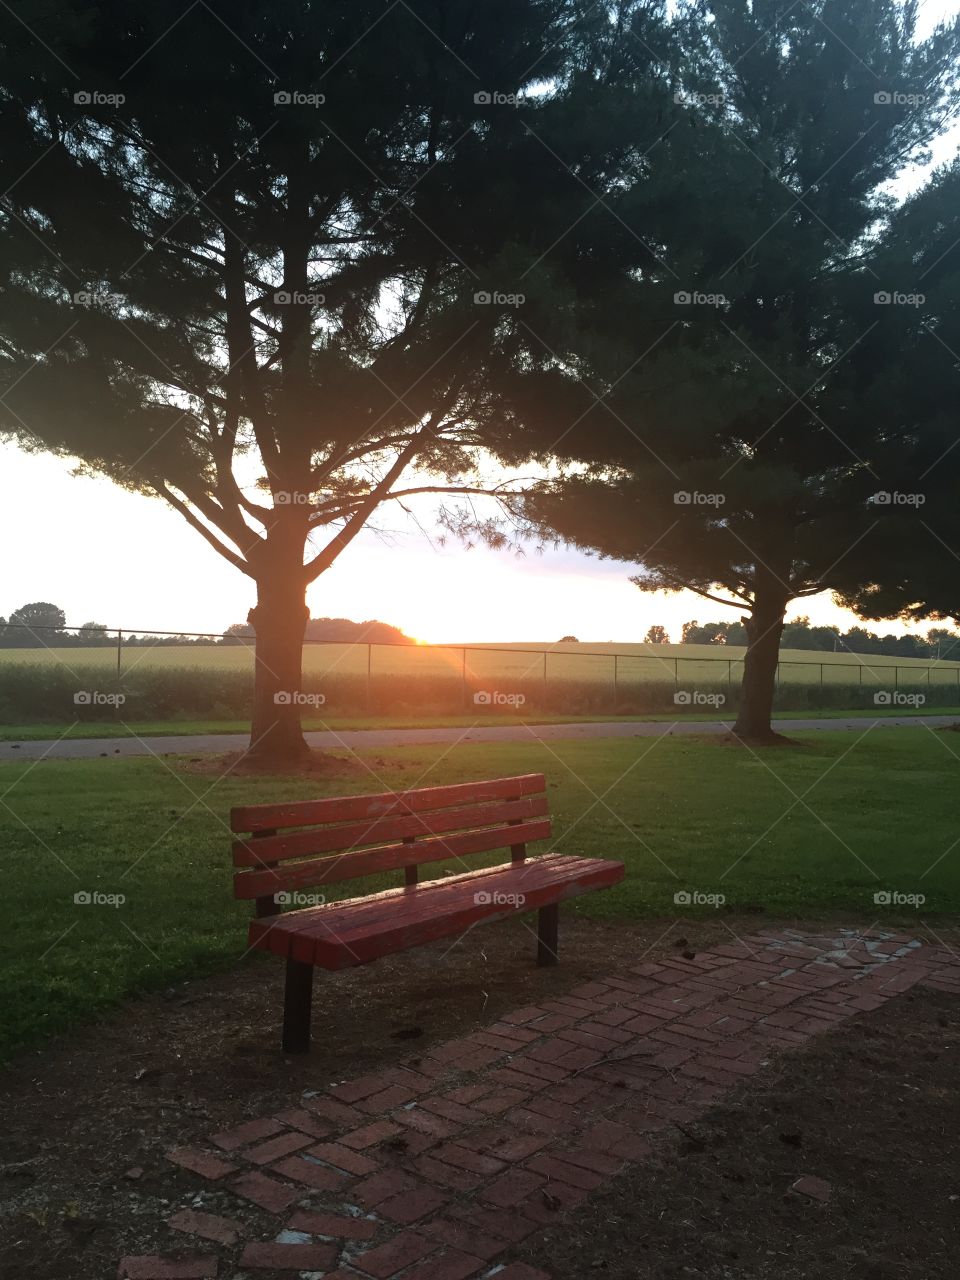 Sunset in the park